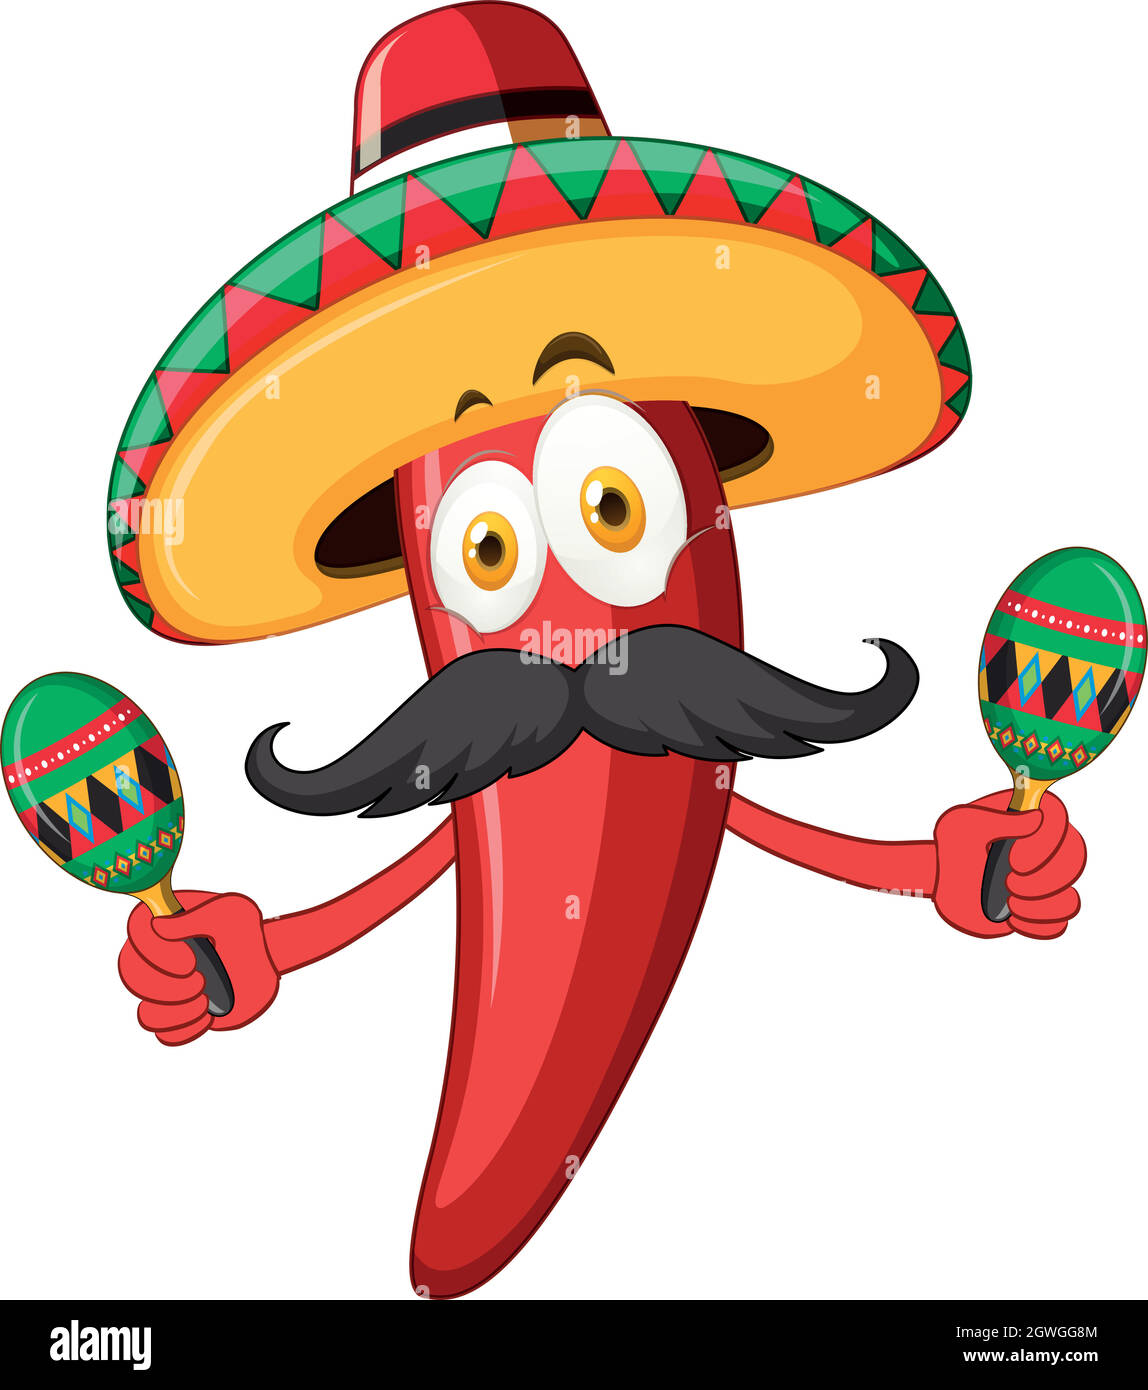 Red chili wearing hat and shaking maracas Stock Vector